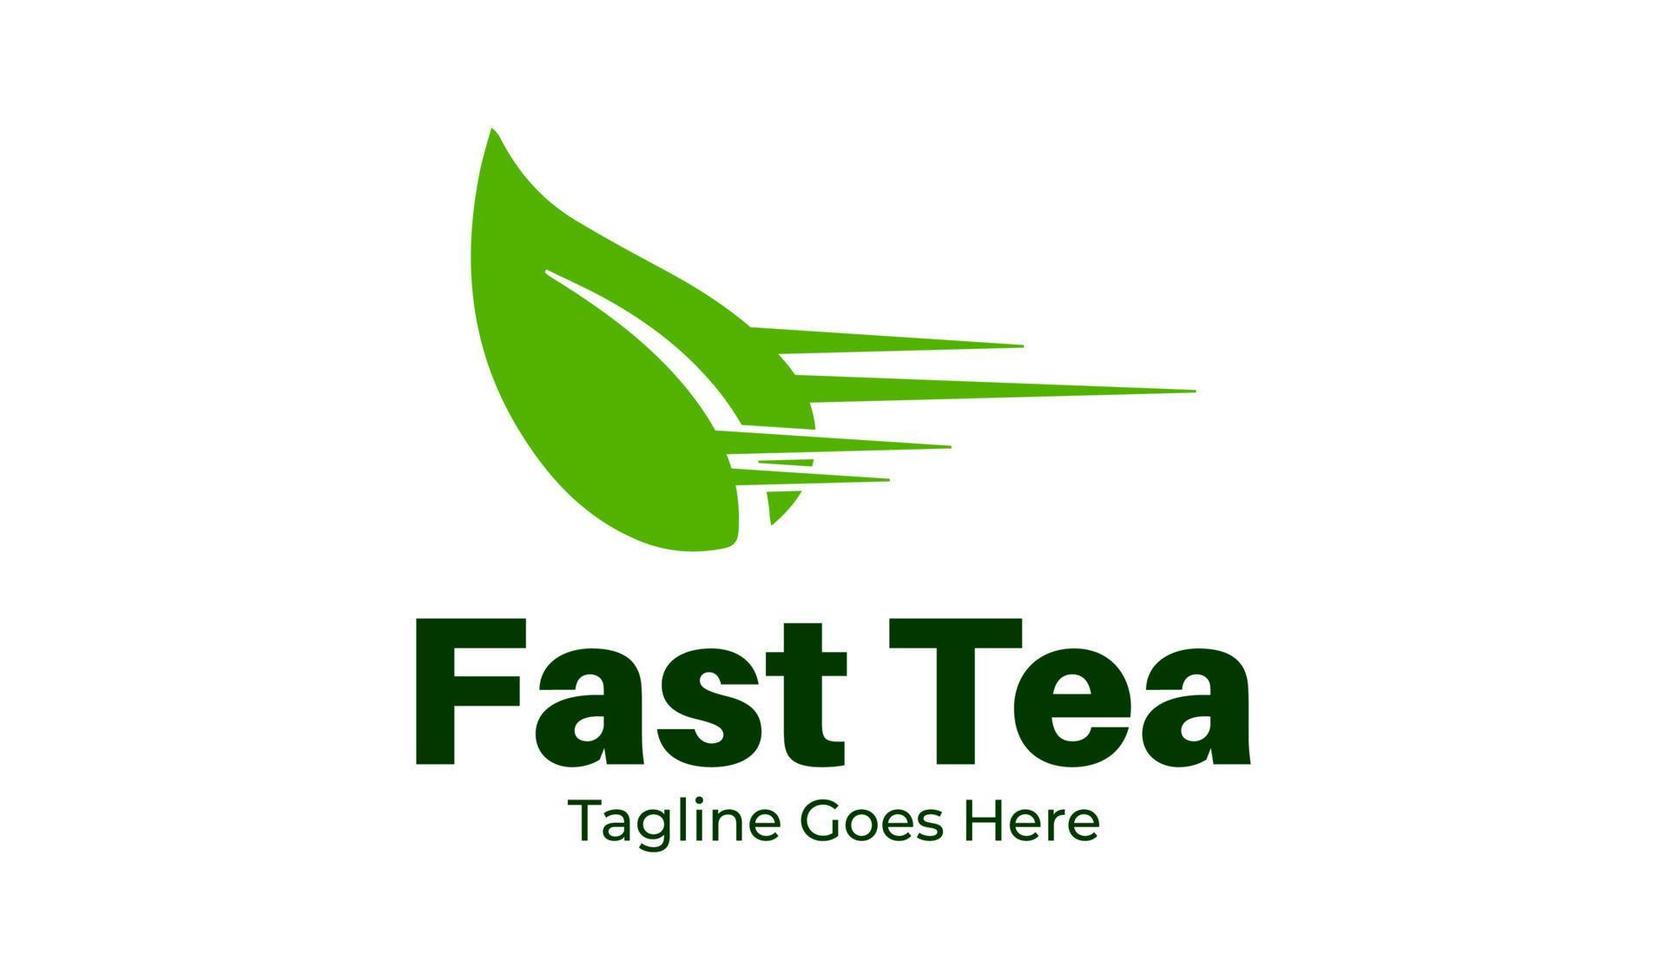 Fast Tea Logo Design Template with tea icon and fast. Perfect for business, company, restaurant, mobile, app, etc vector